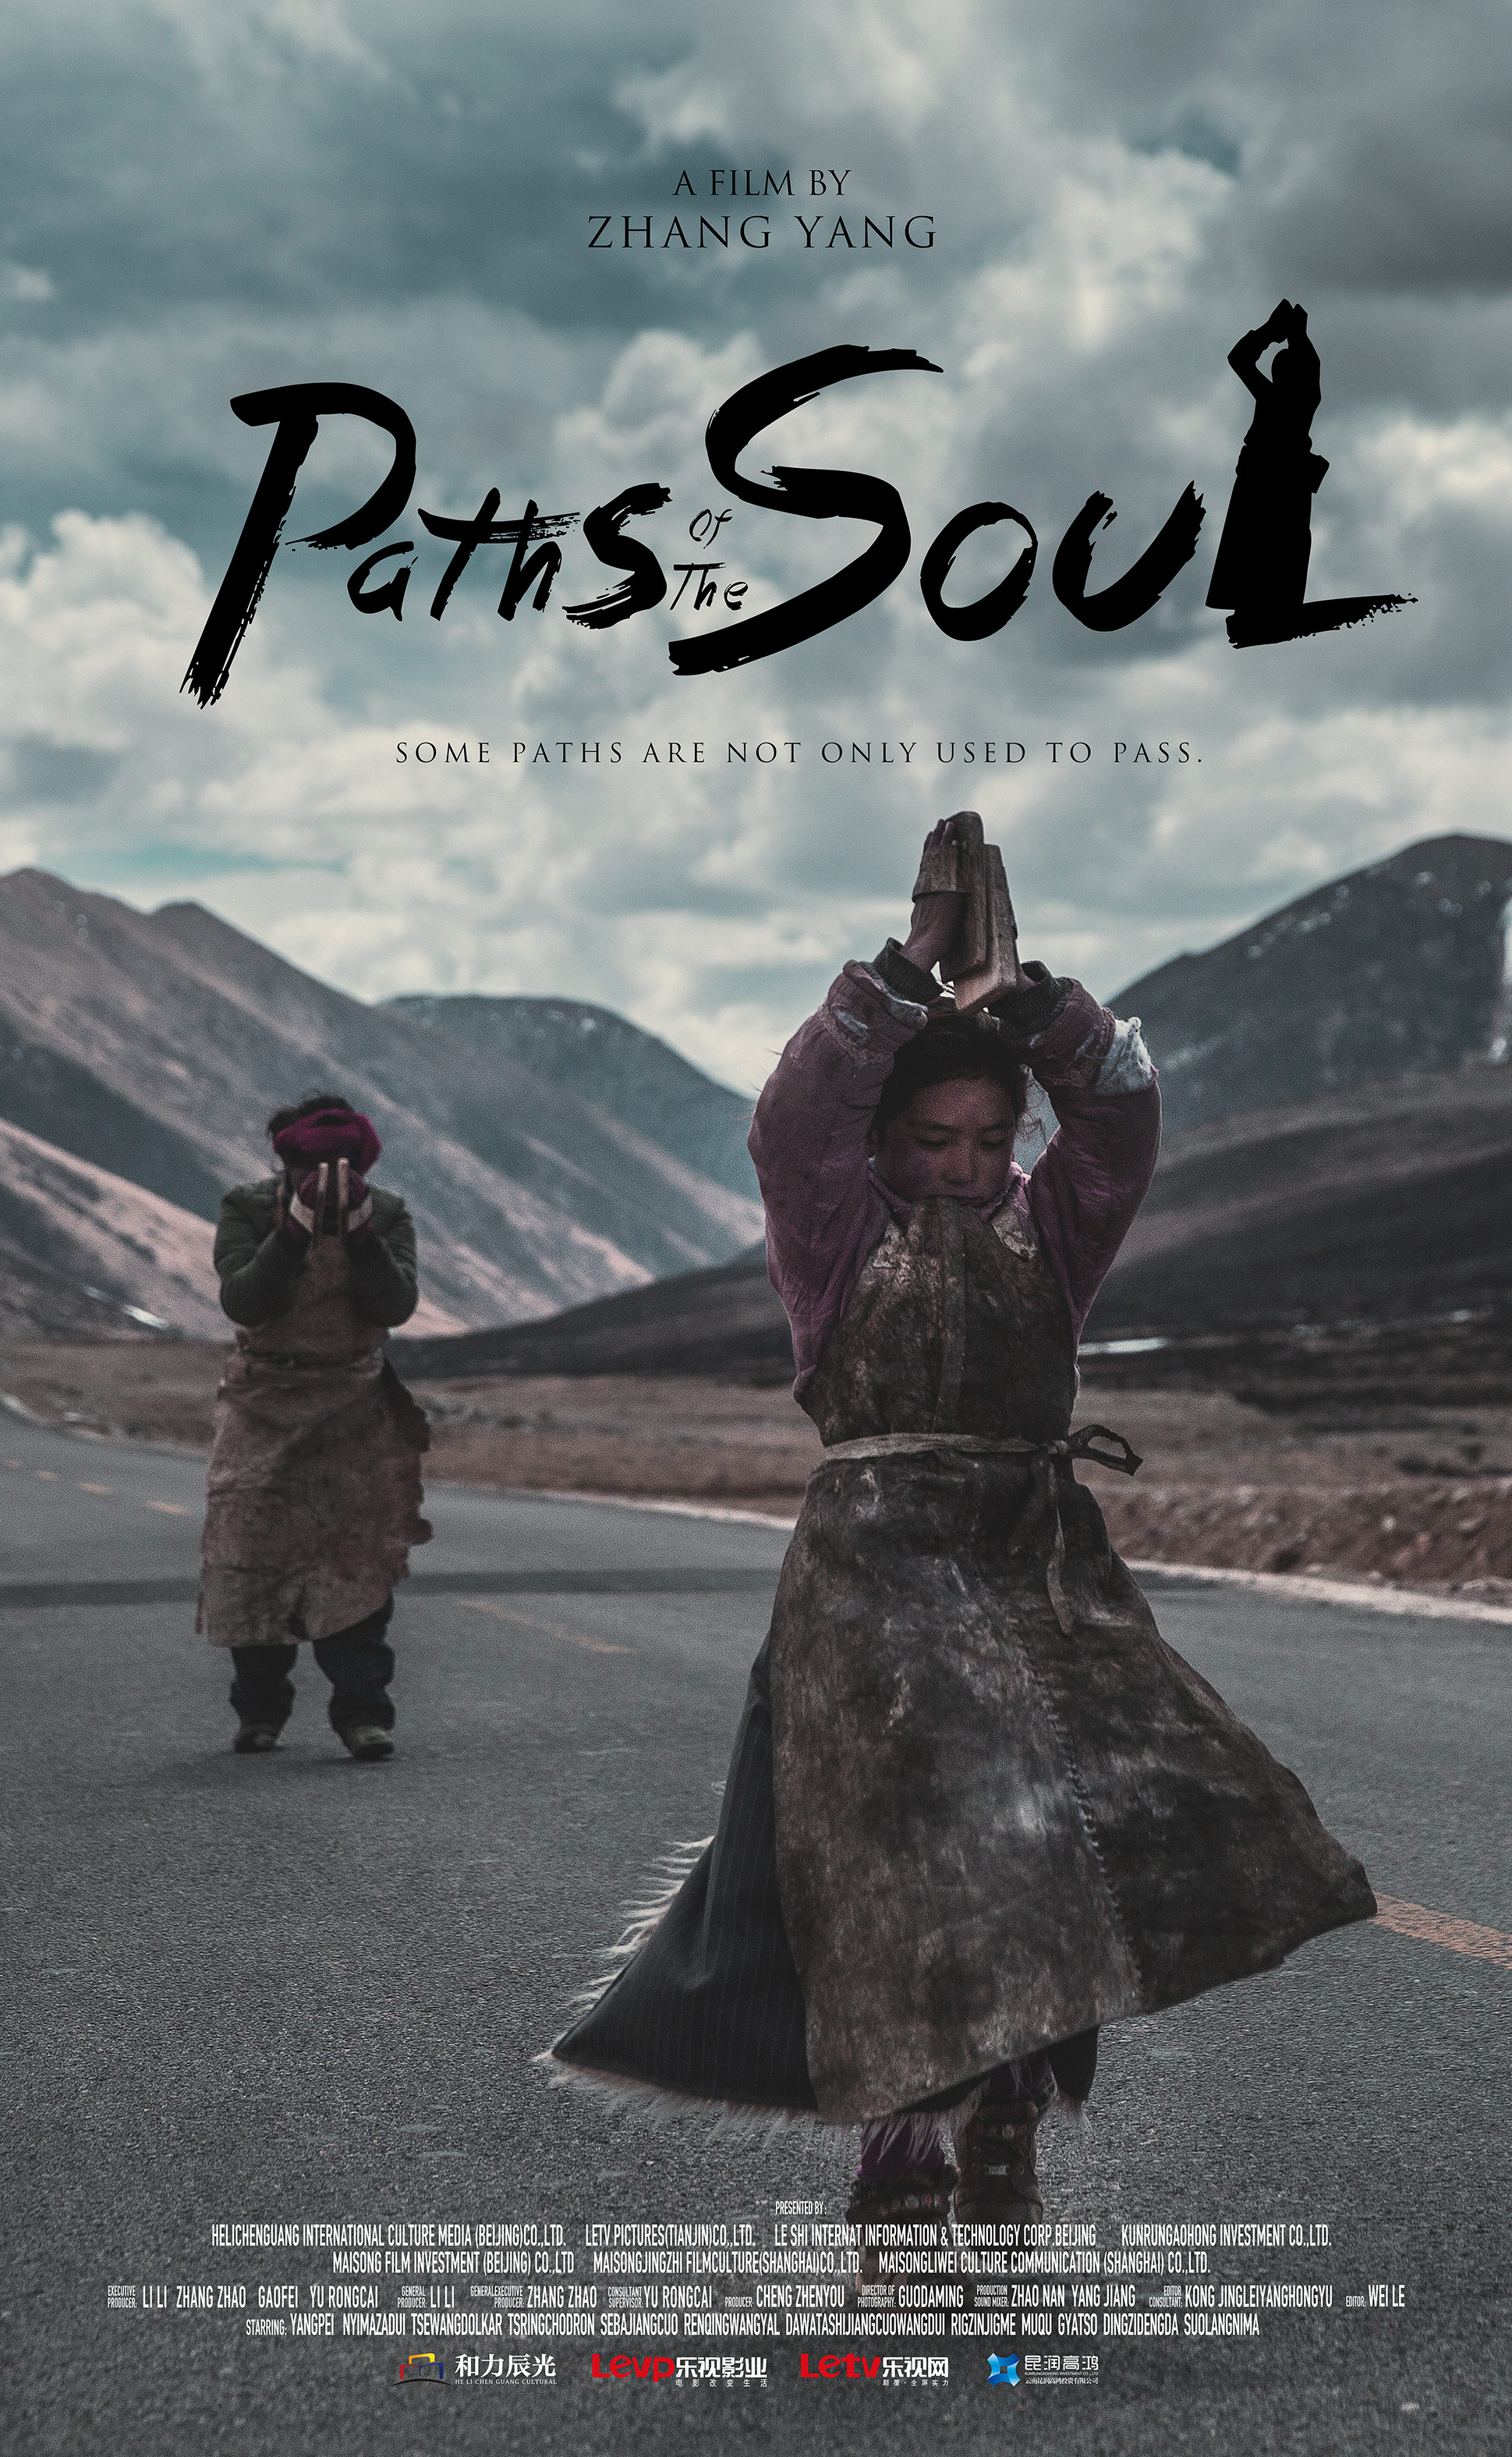 moviegoer.com: PATHS OF THE SOUL movie poster